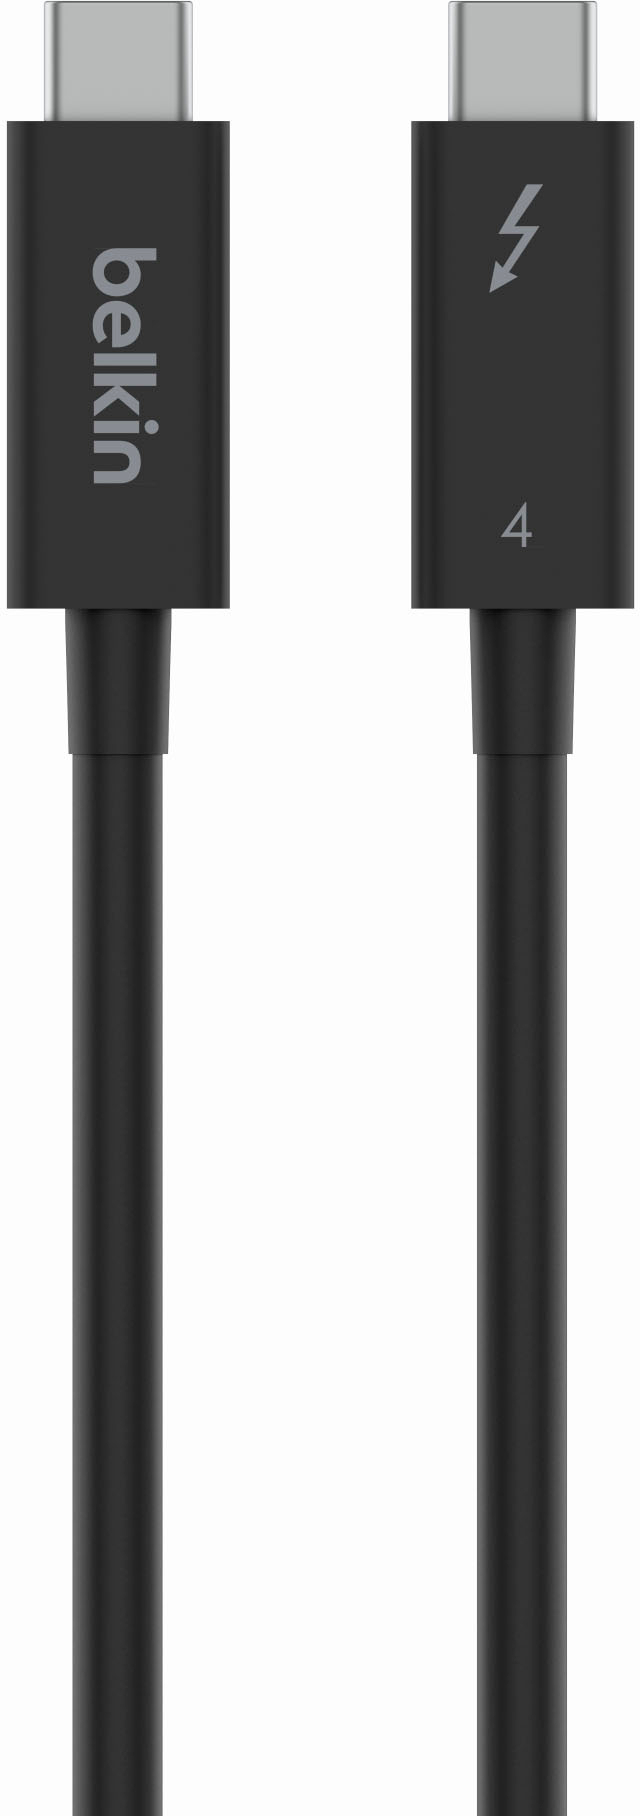 Belkin 3.3' 8K USB-C to USB-C Thunderbolt Cable with 40Gbps High Speed Data  Transfer Black INZ003bt1MBK - Best Buy